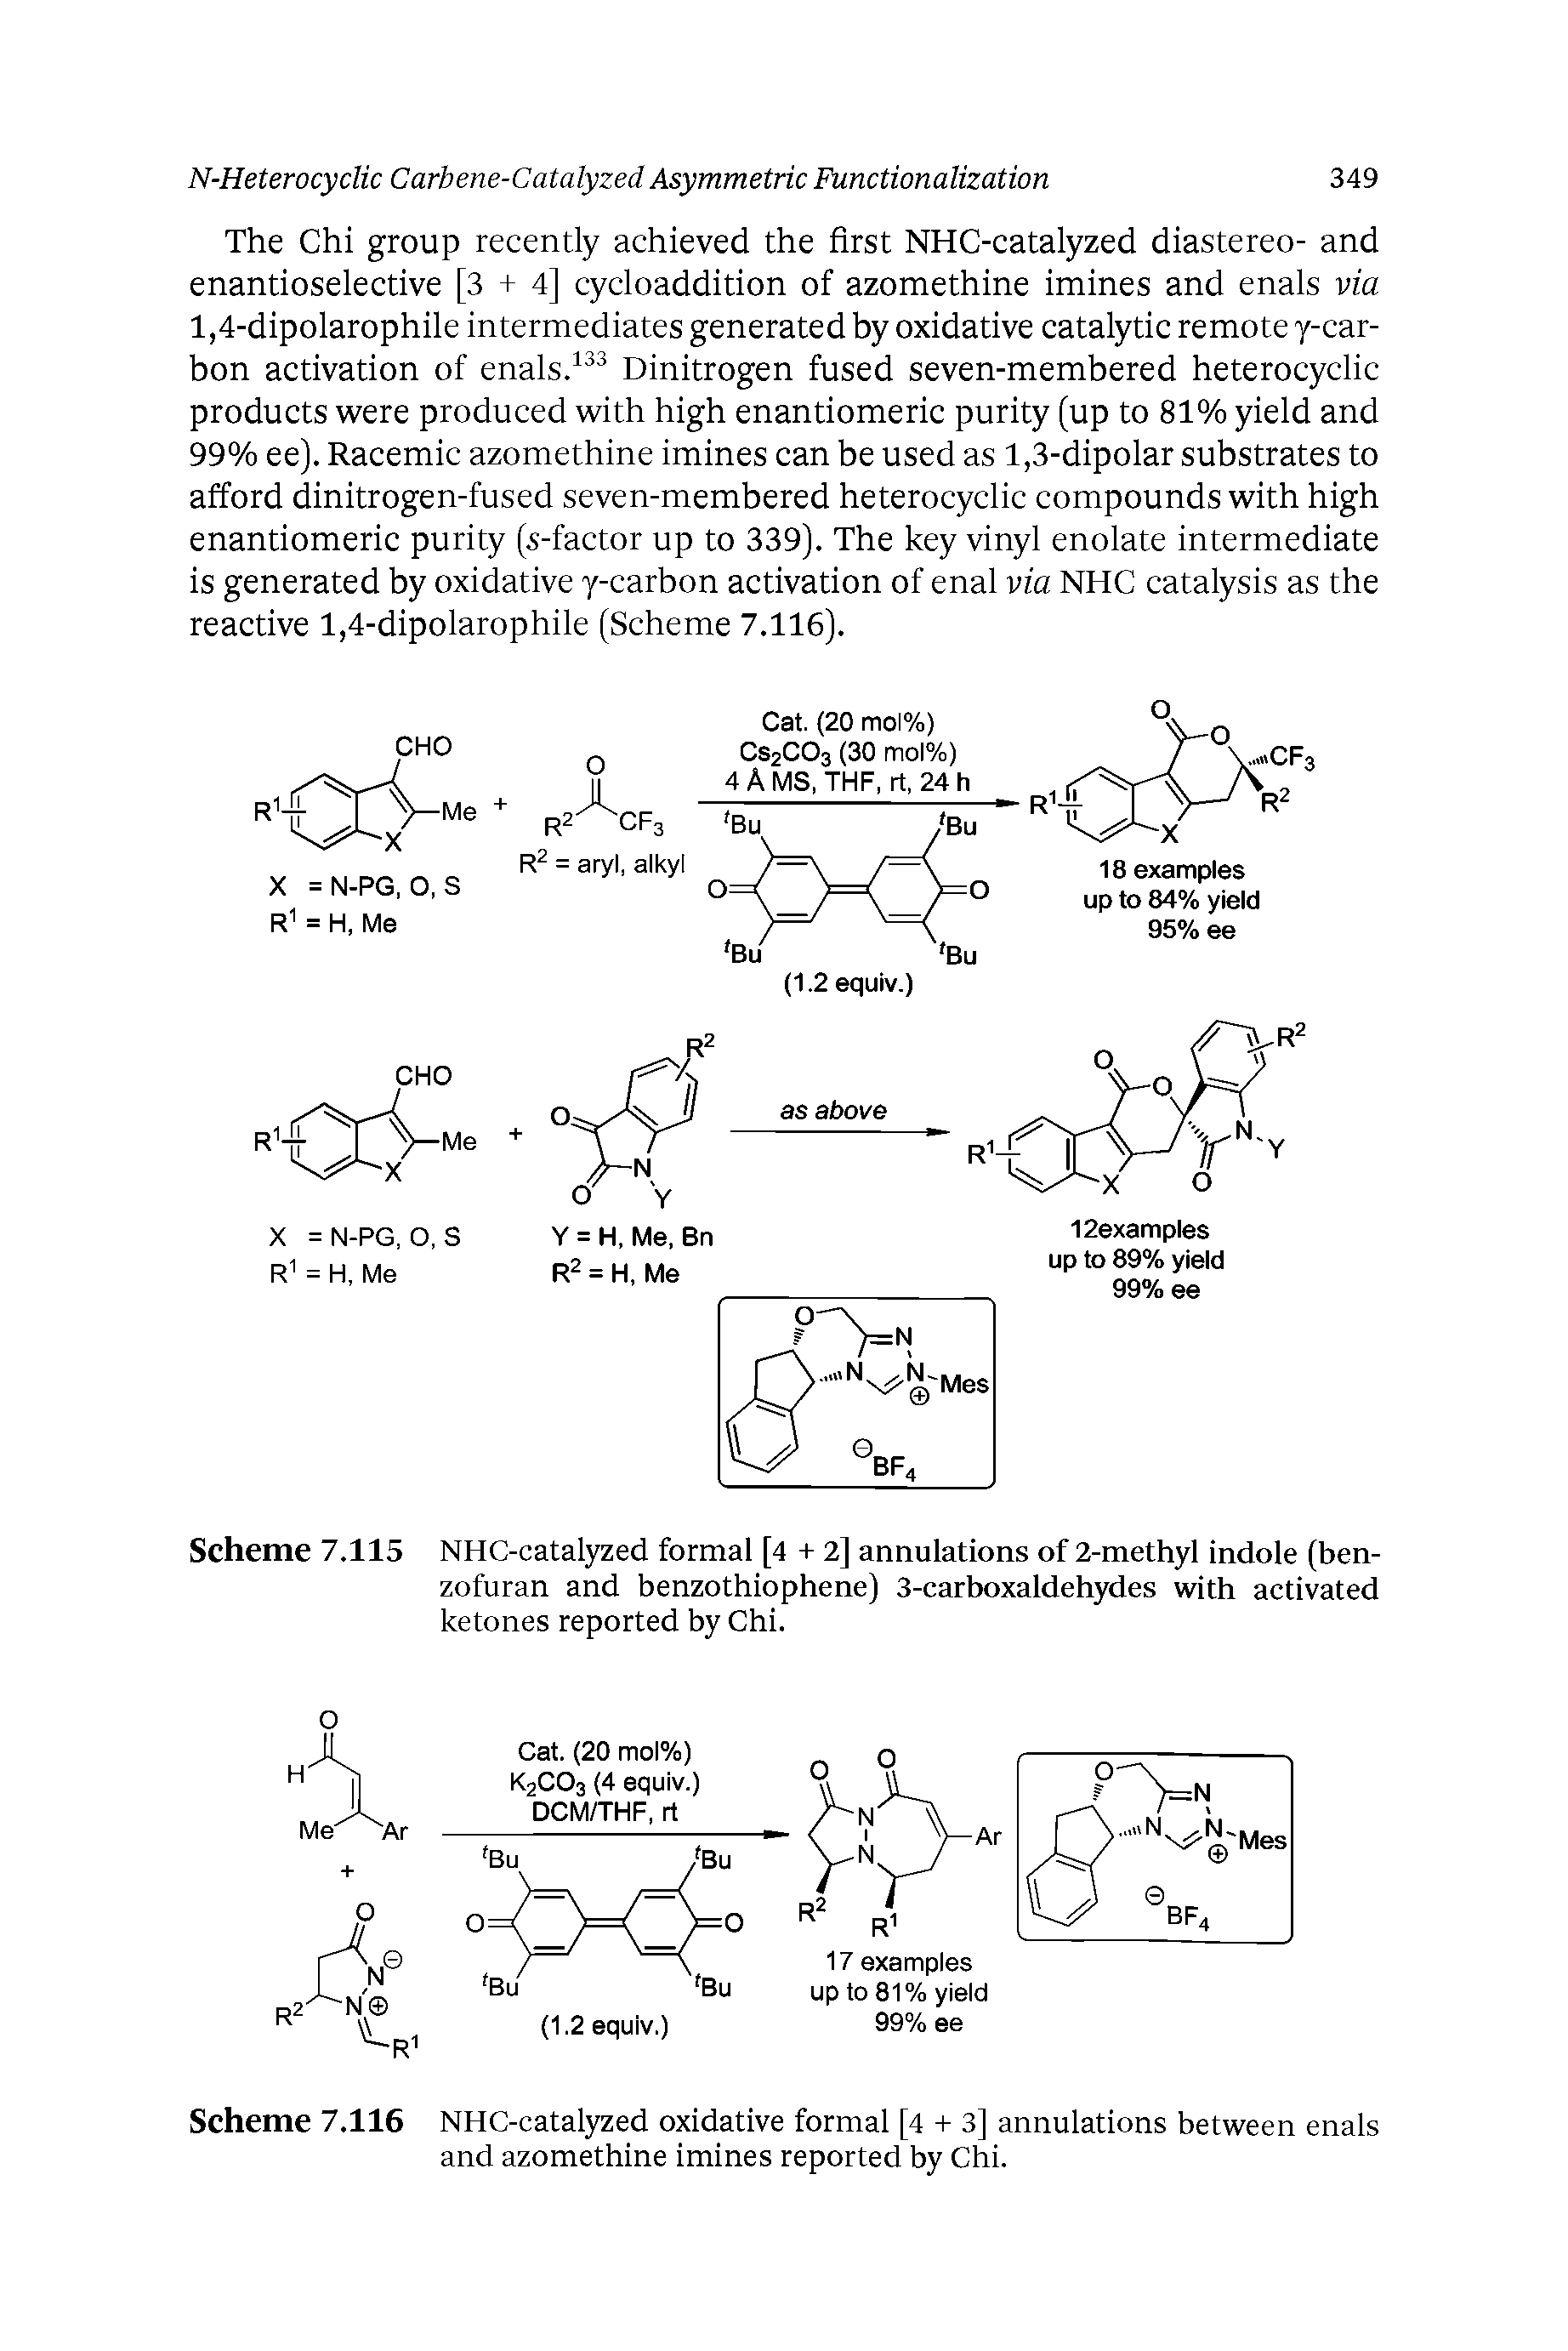 Scheme 7.116 NHC-catalyzed oxidative formal [4 + 3] annulations between enals and azomethine imines reported by Chi.